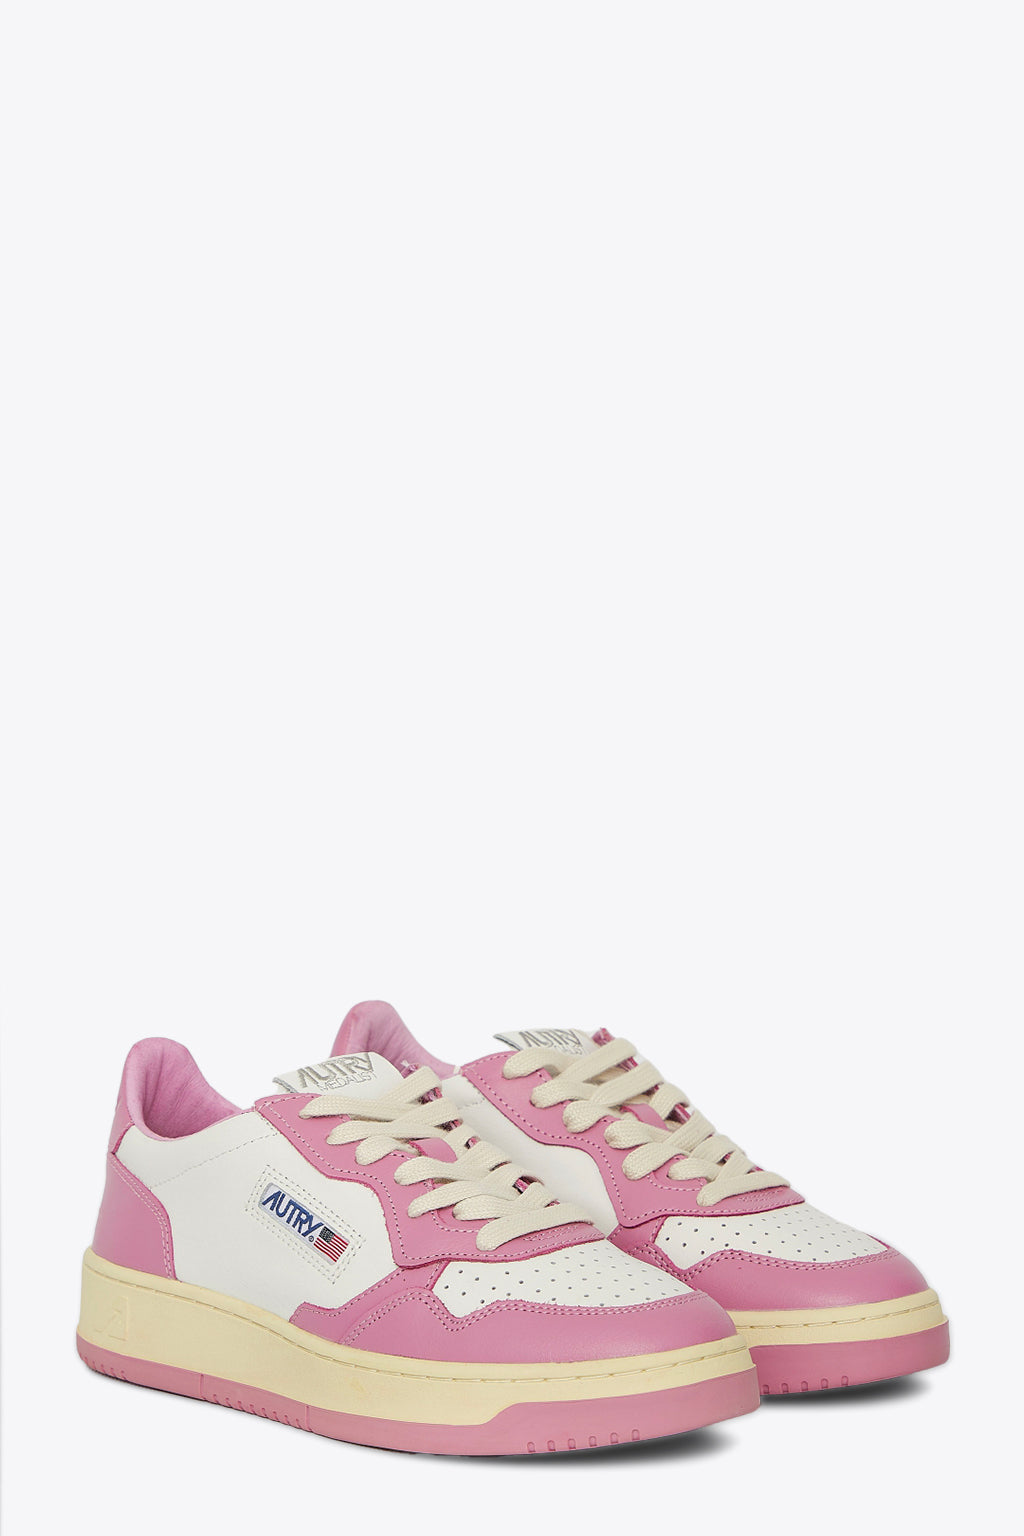 alt-image__Pink-and-white-leather-low-sneaker---Medalist